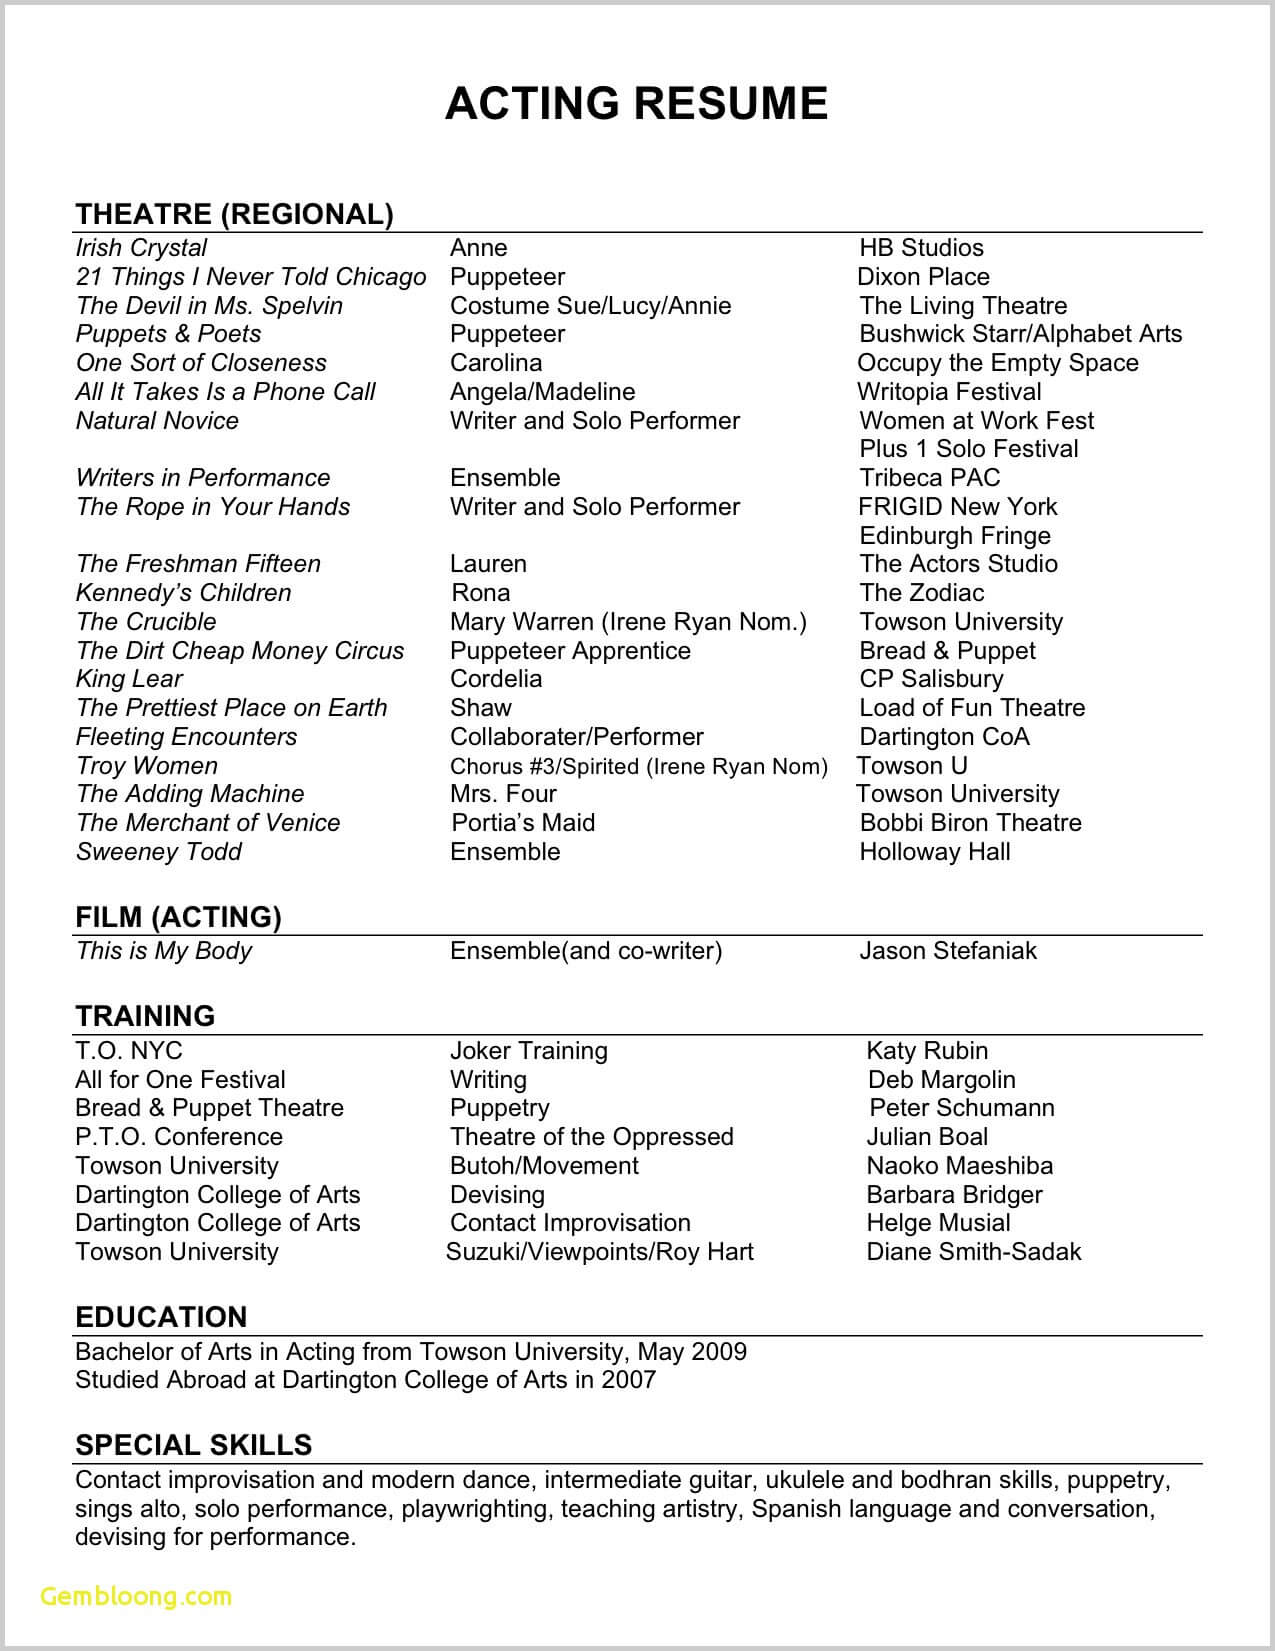 Theatre Resume Template Free A Format 84052 25 Samp ~ Curbshoppe Pertaining To Theatrical Resume Template Word